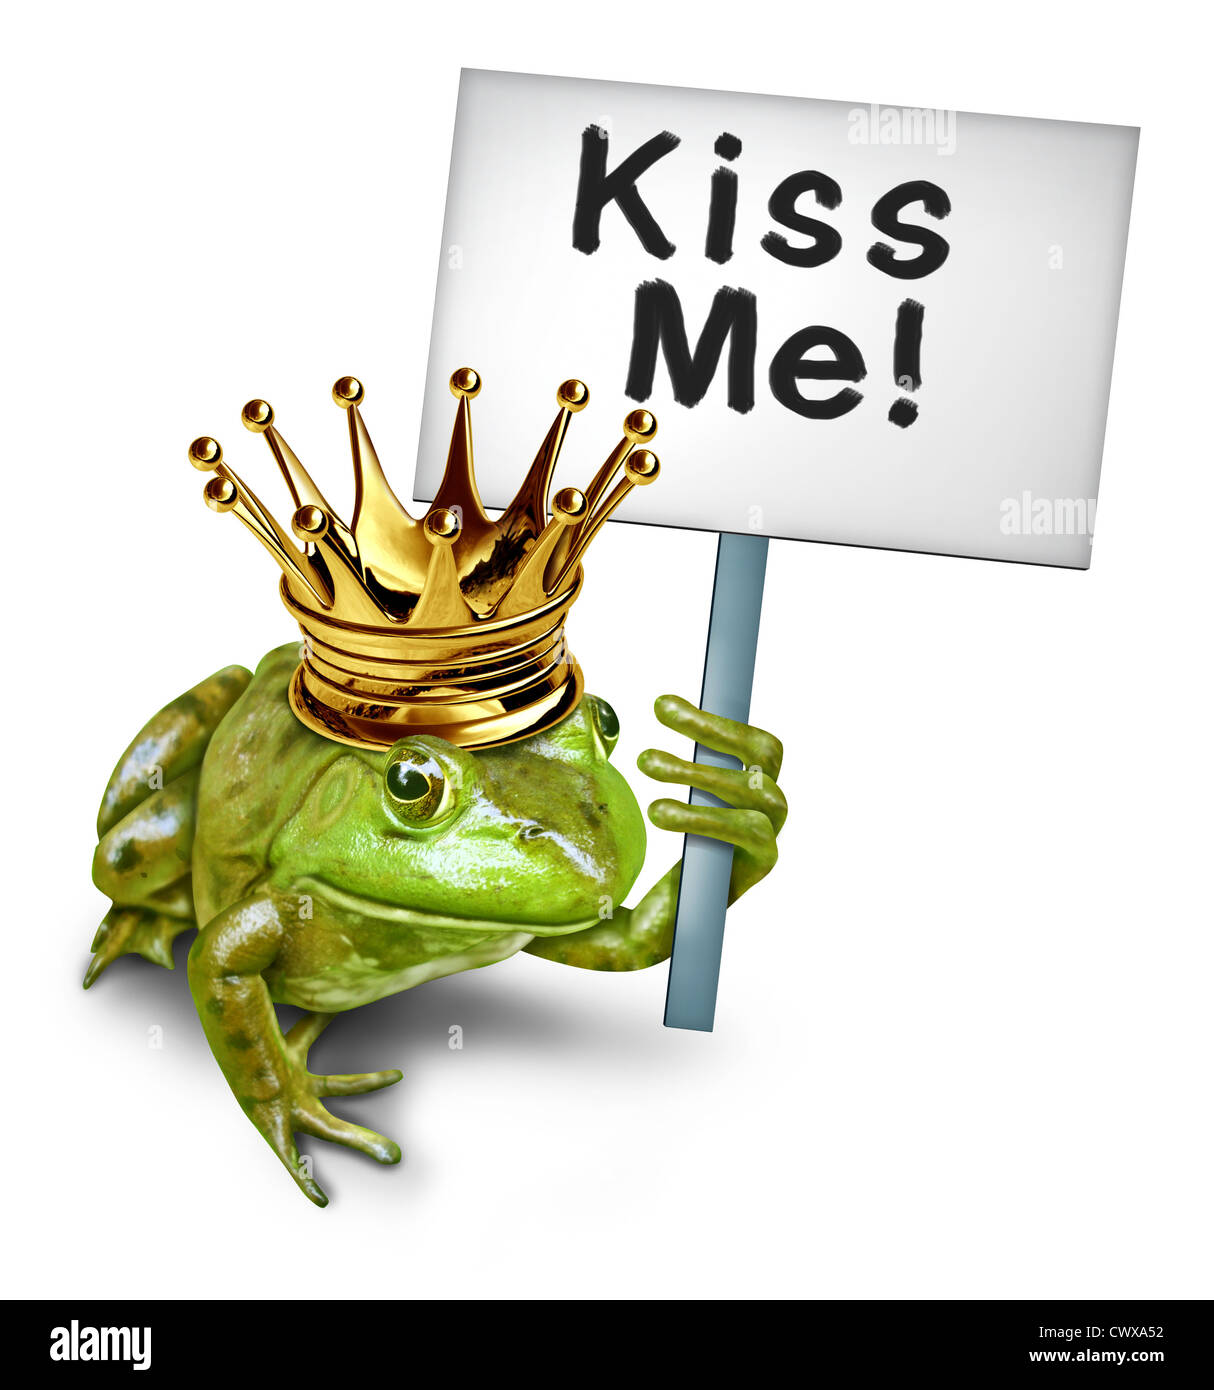 Looking for love by a green happy smiling amphibian frog prince with a gold crown holding a sign saying kiss me as a symbol of romantic dating and relationships for singles and lonely lovers seeking a mate or life partner. Stock Photo